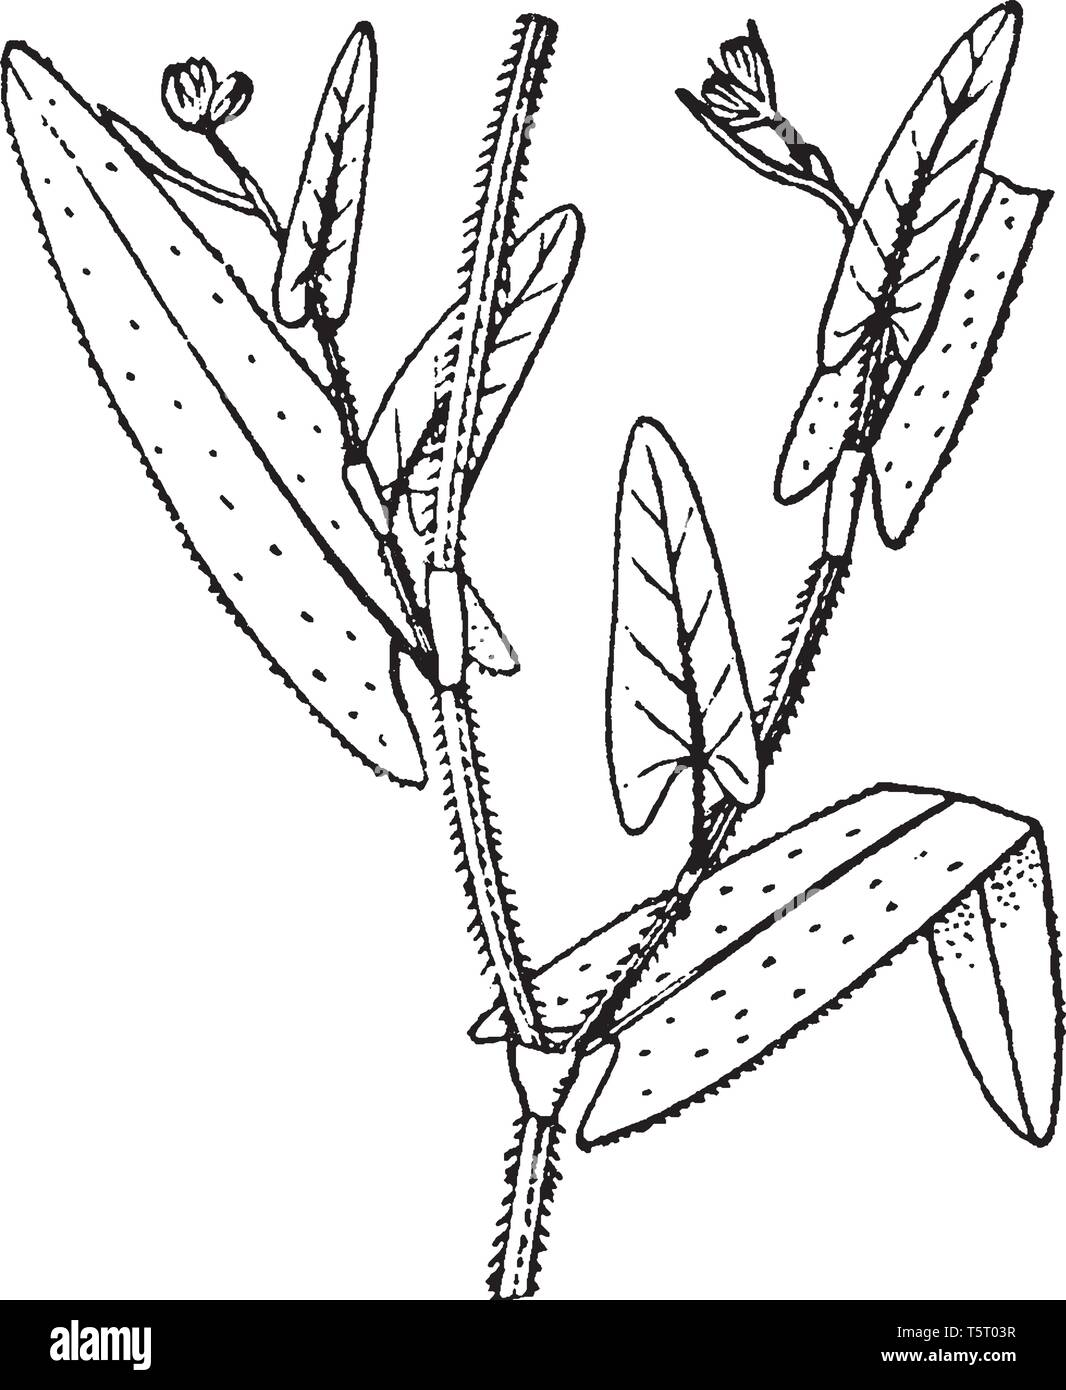 The smooth-edged leaves are long, and vary in shape between species from narrow lanceolate to oval, broad triangular, vintage line drawing or engravin Stock Vector